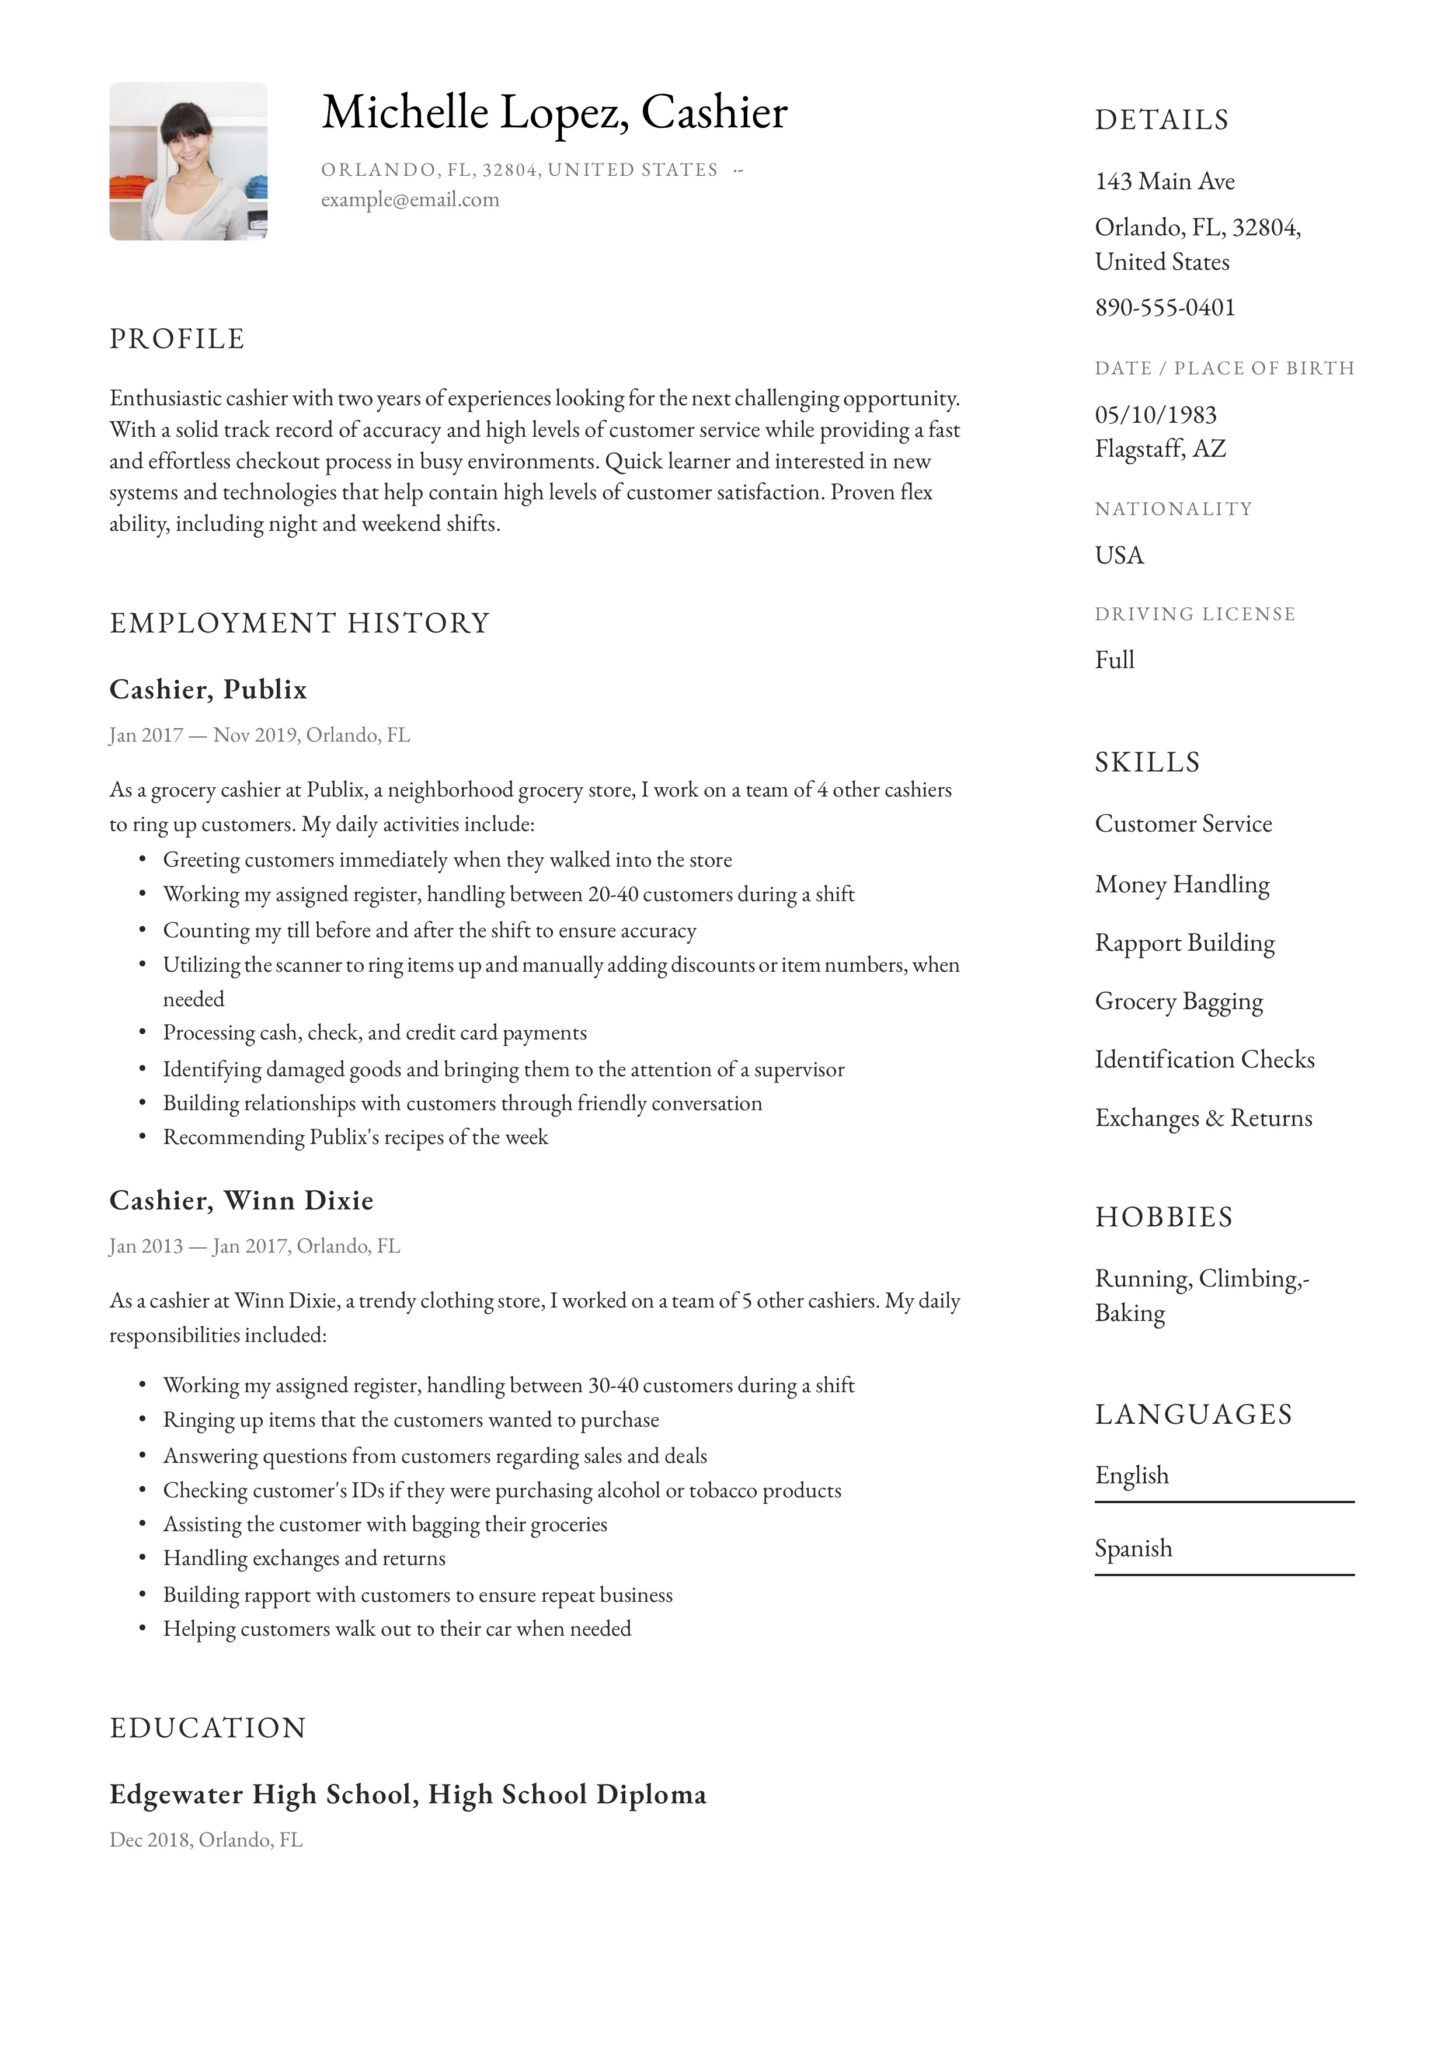 cashier resume with photo